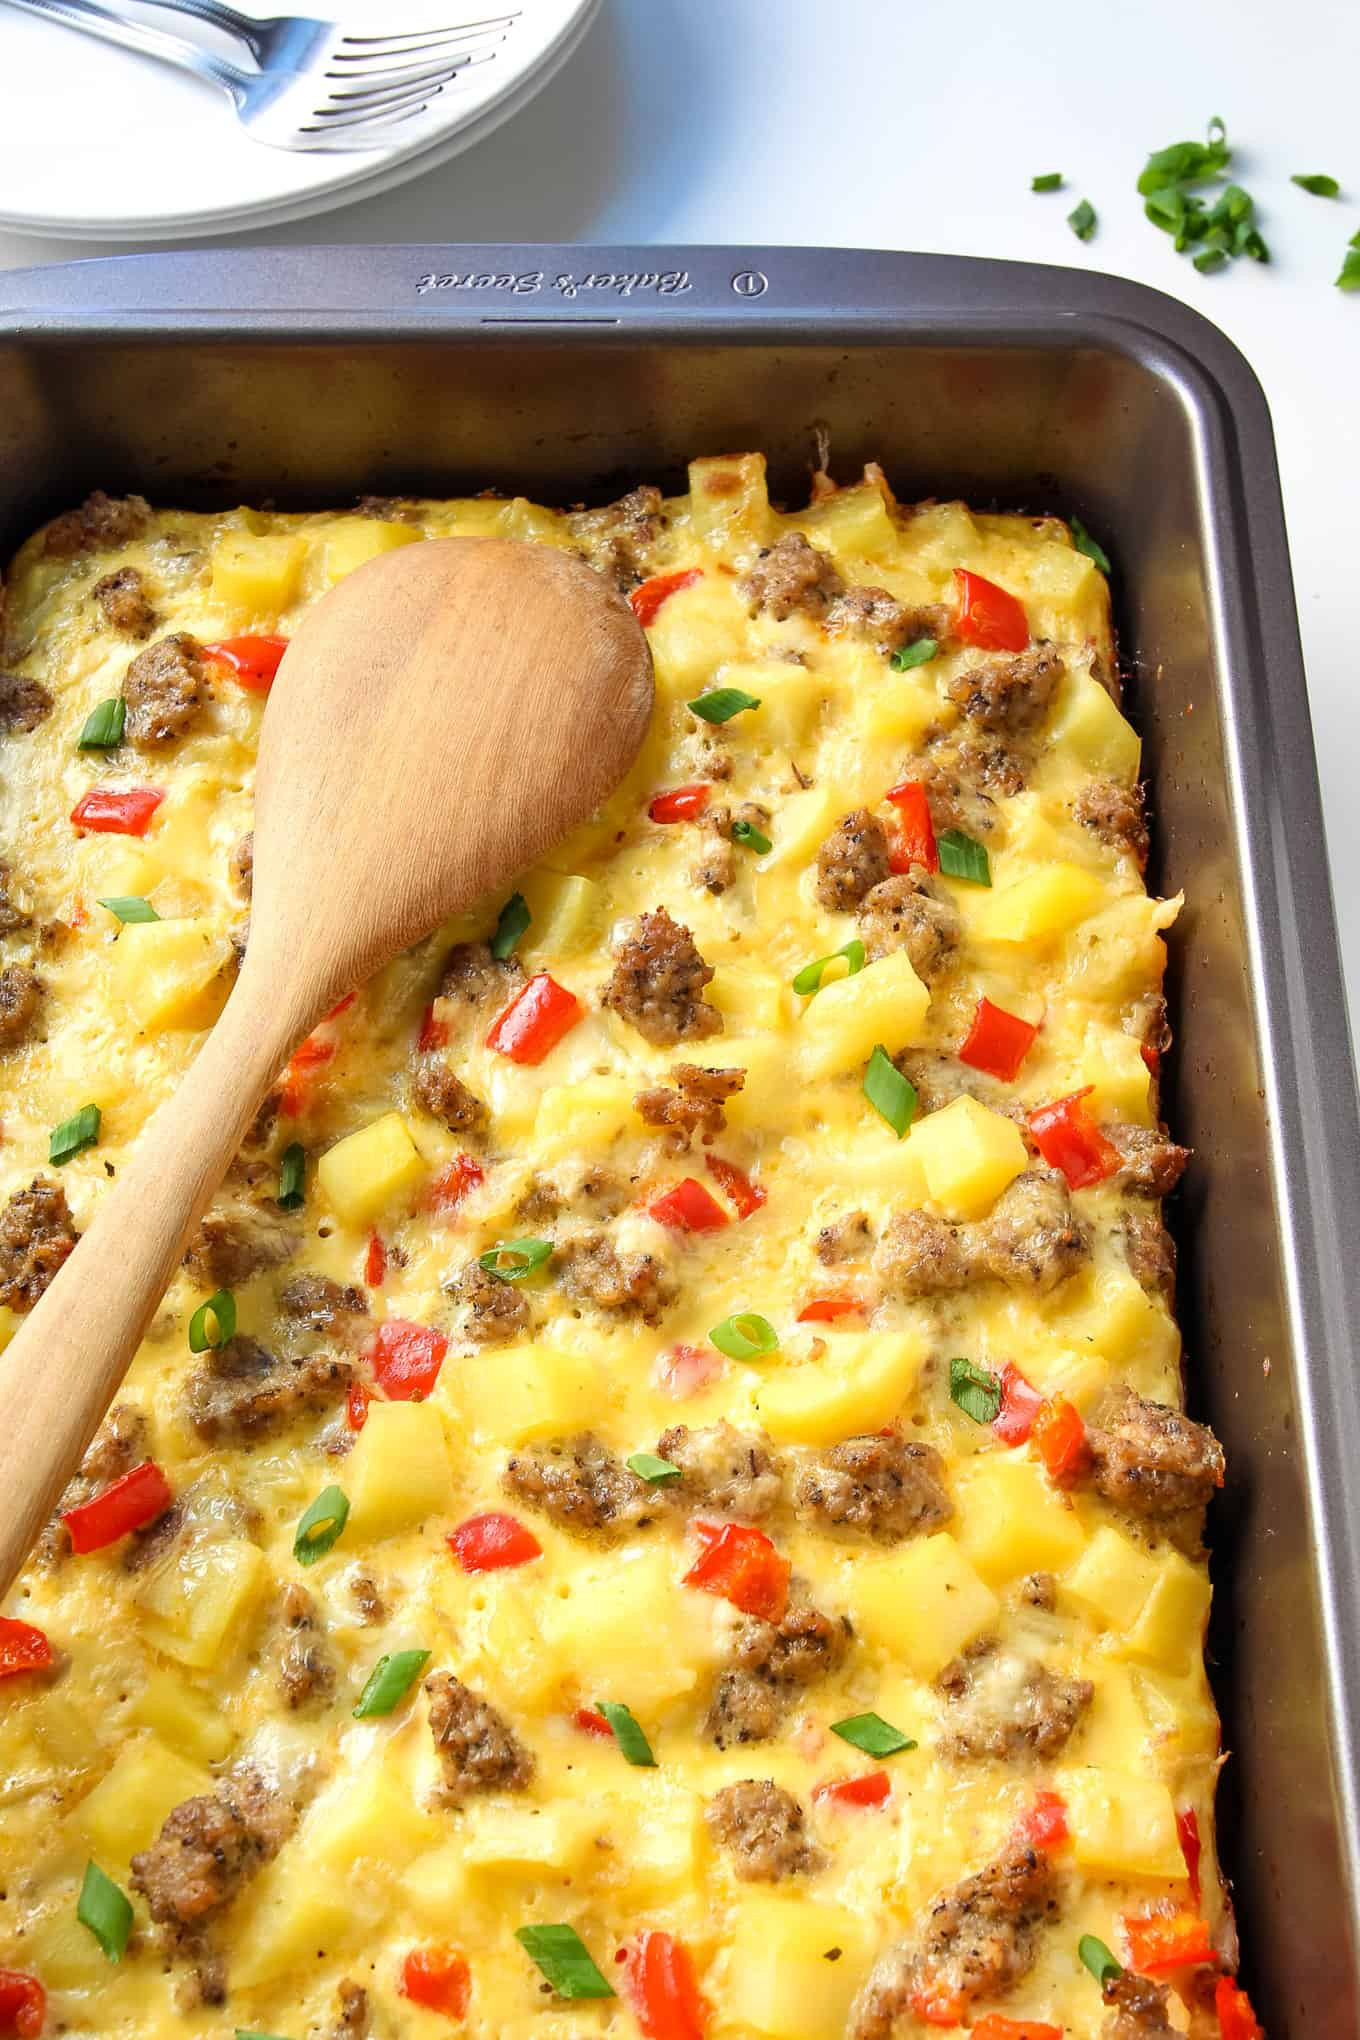 Breakfast Casserole With Potatoes Sausage Eggs And Cheese
 Breakfast Casserole with Eggs Potatoes and Sausage